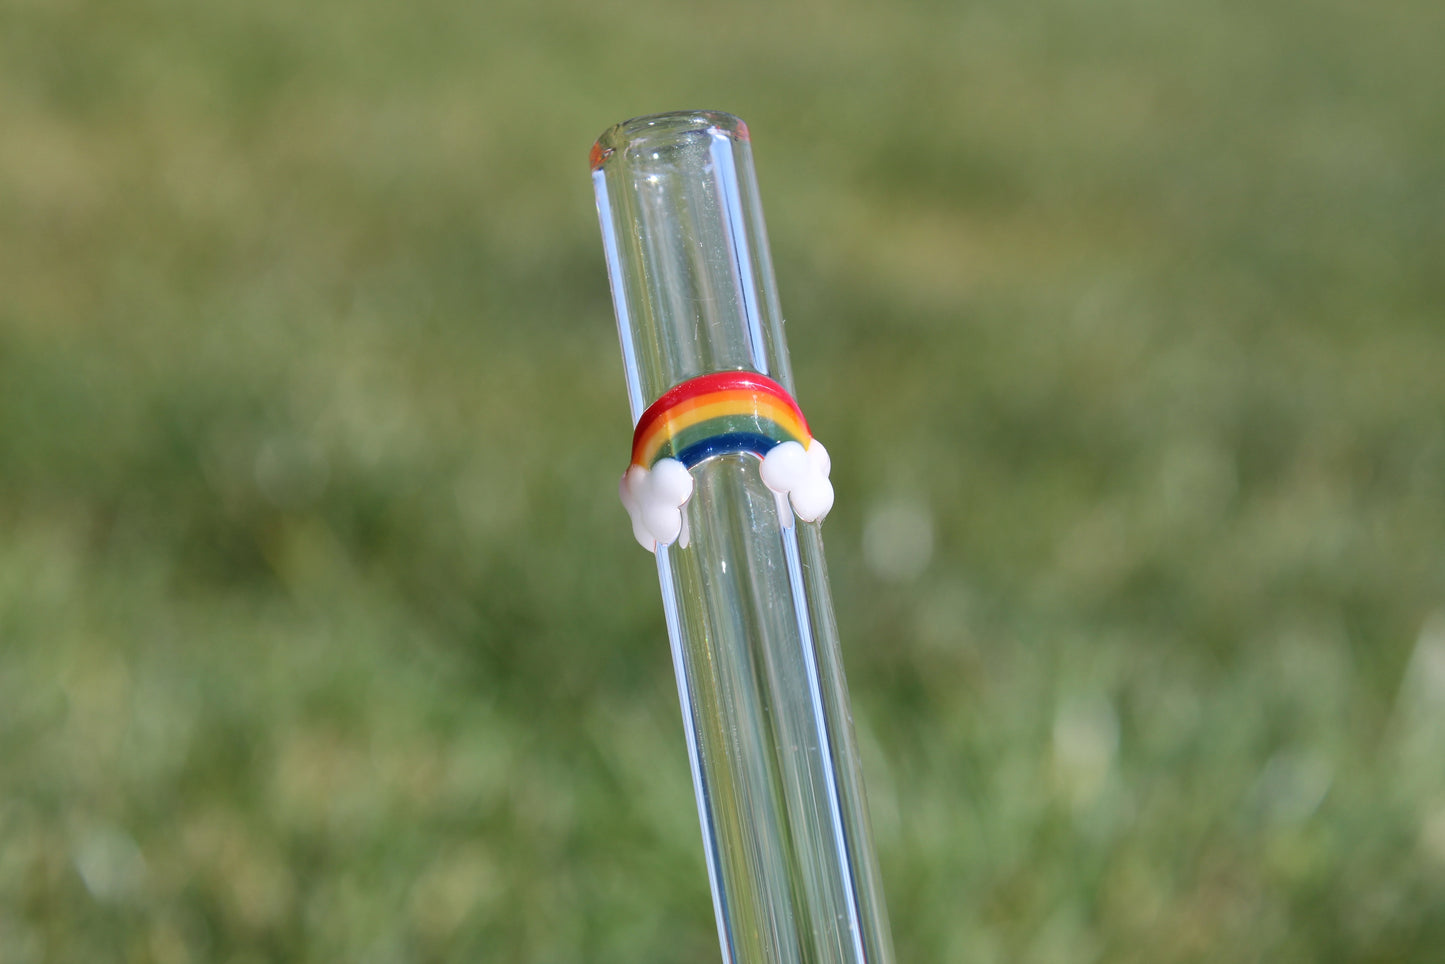 Chunky Smoothie Glass Straw with Cleaning Brush - Rainbow